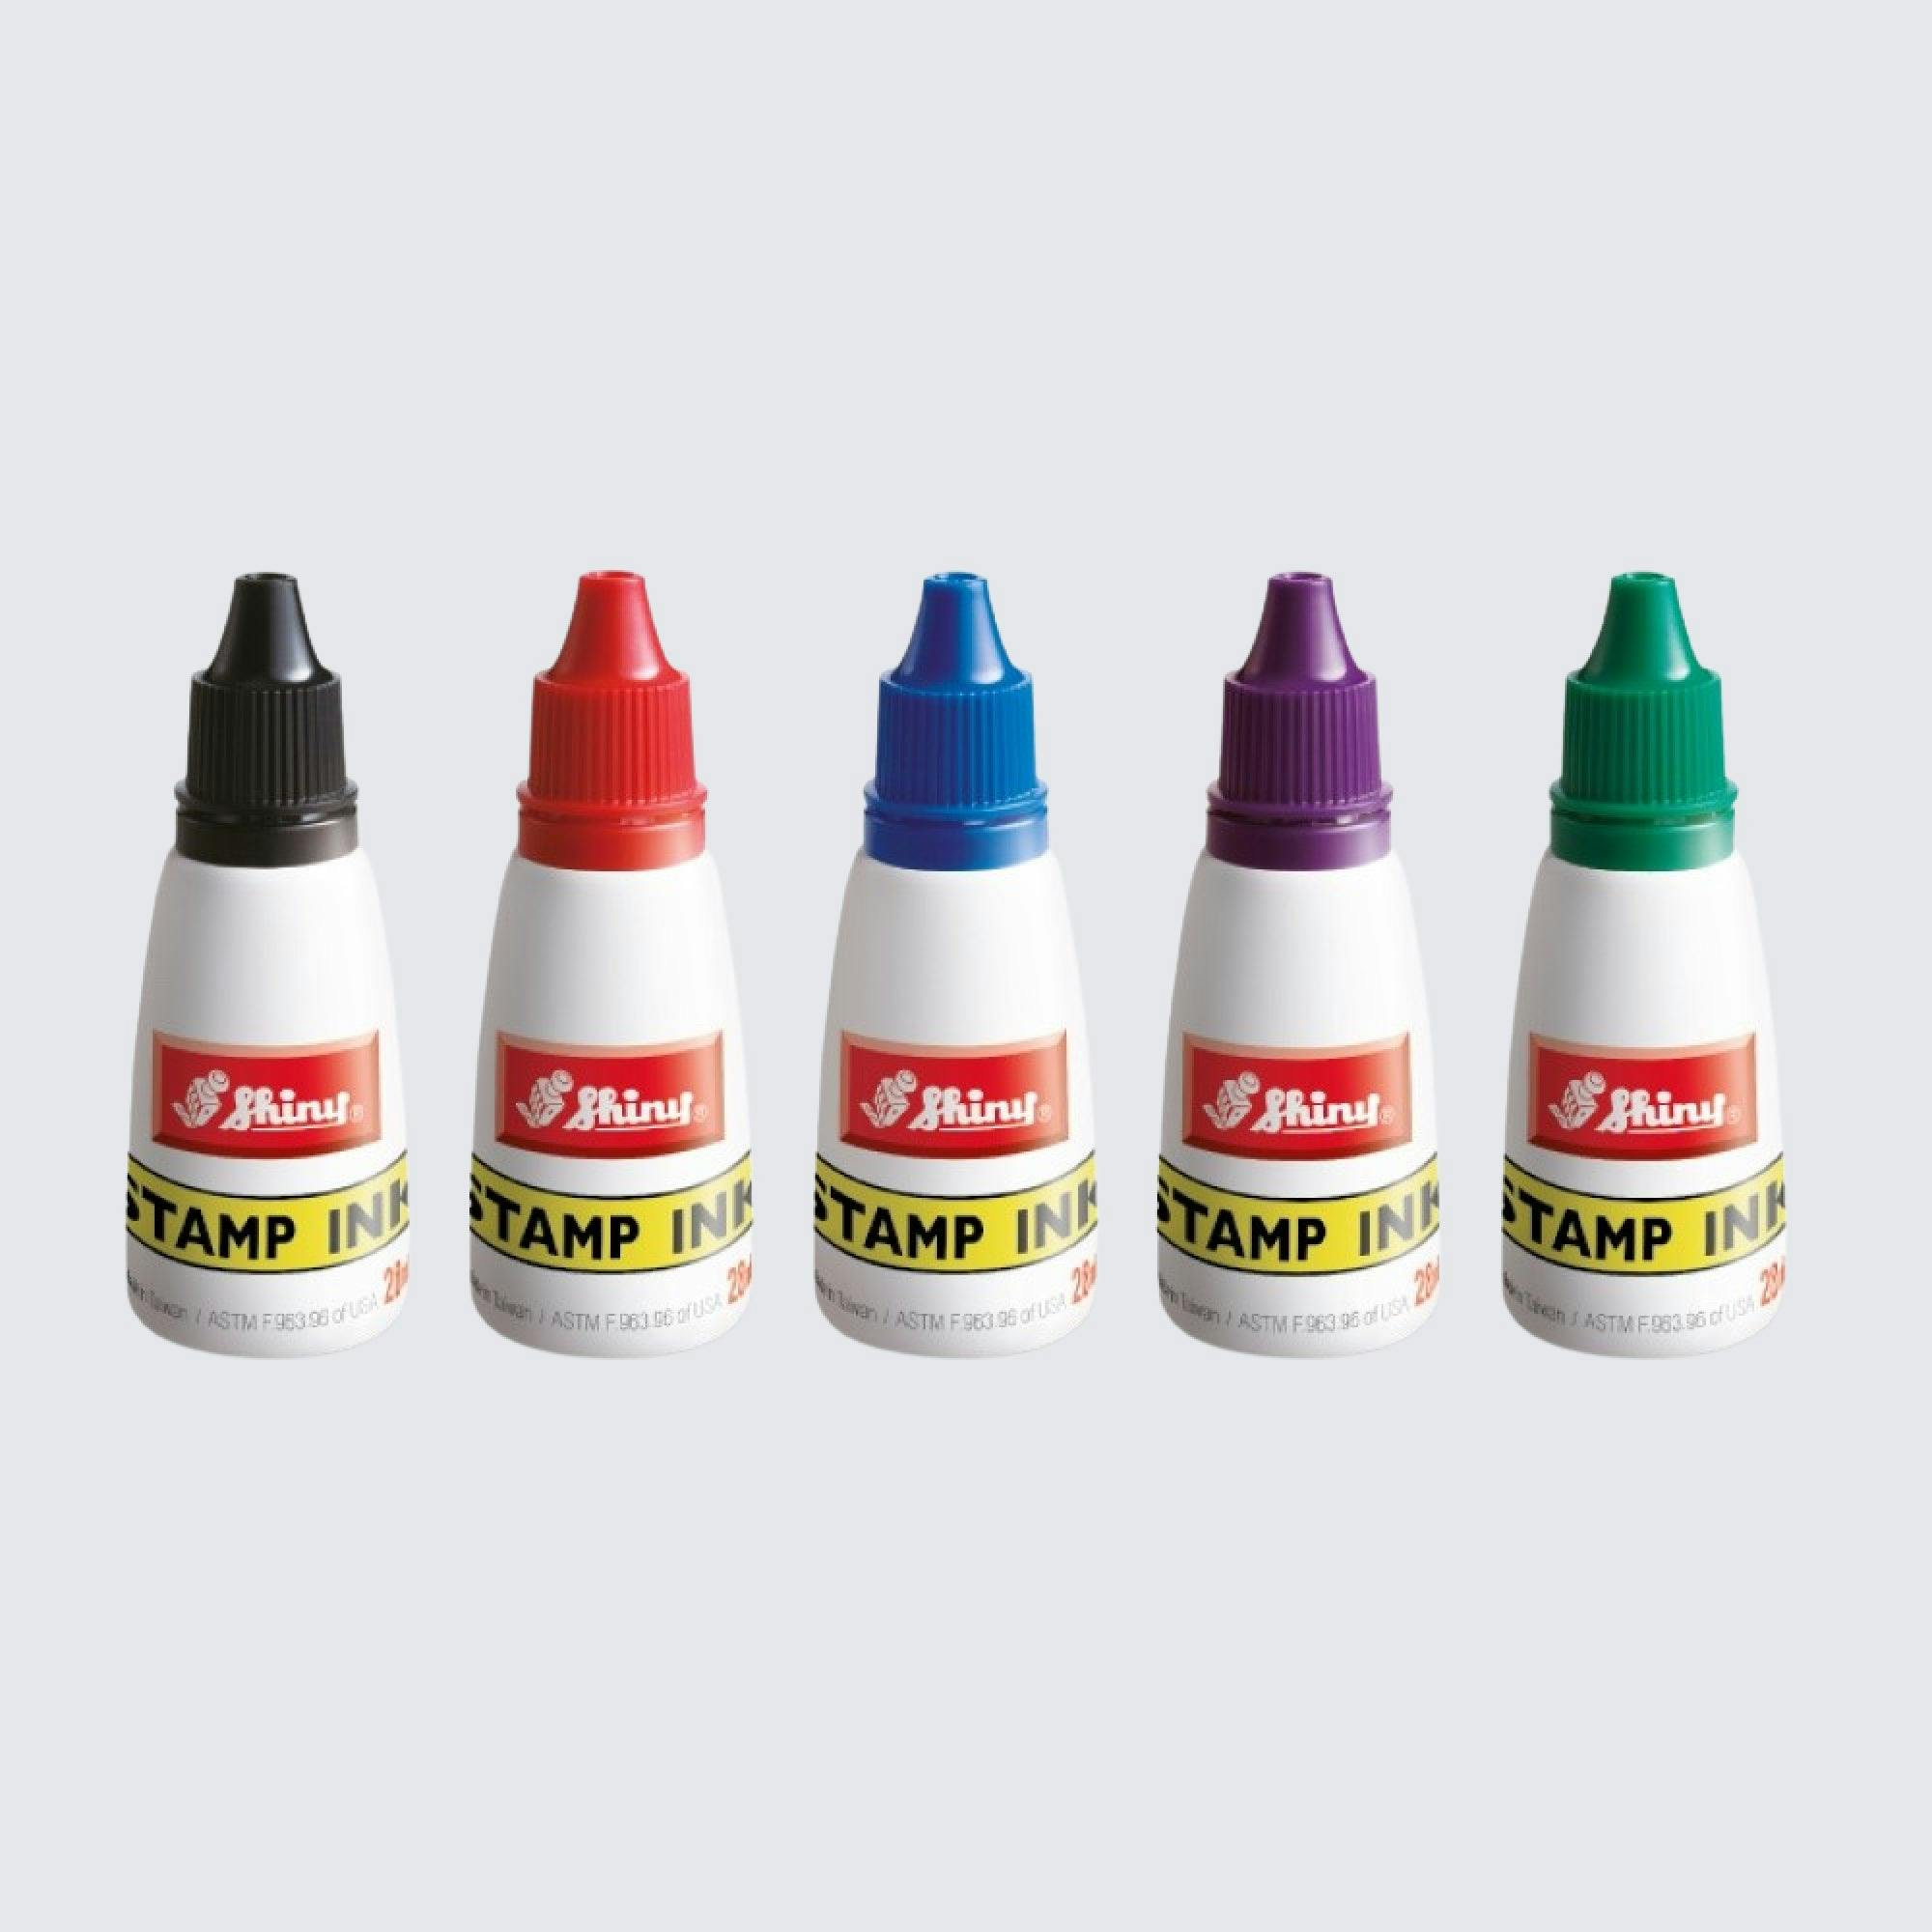 Images of Self-Inking Stamp Ink (28ml) (1)